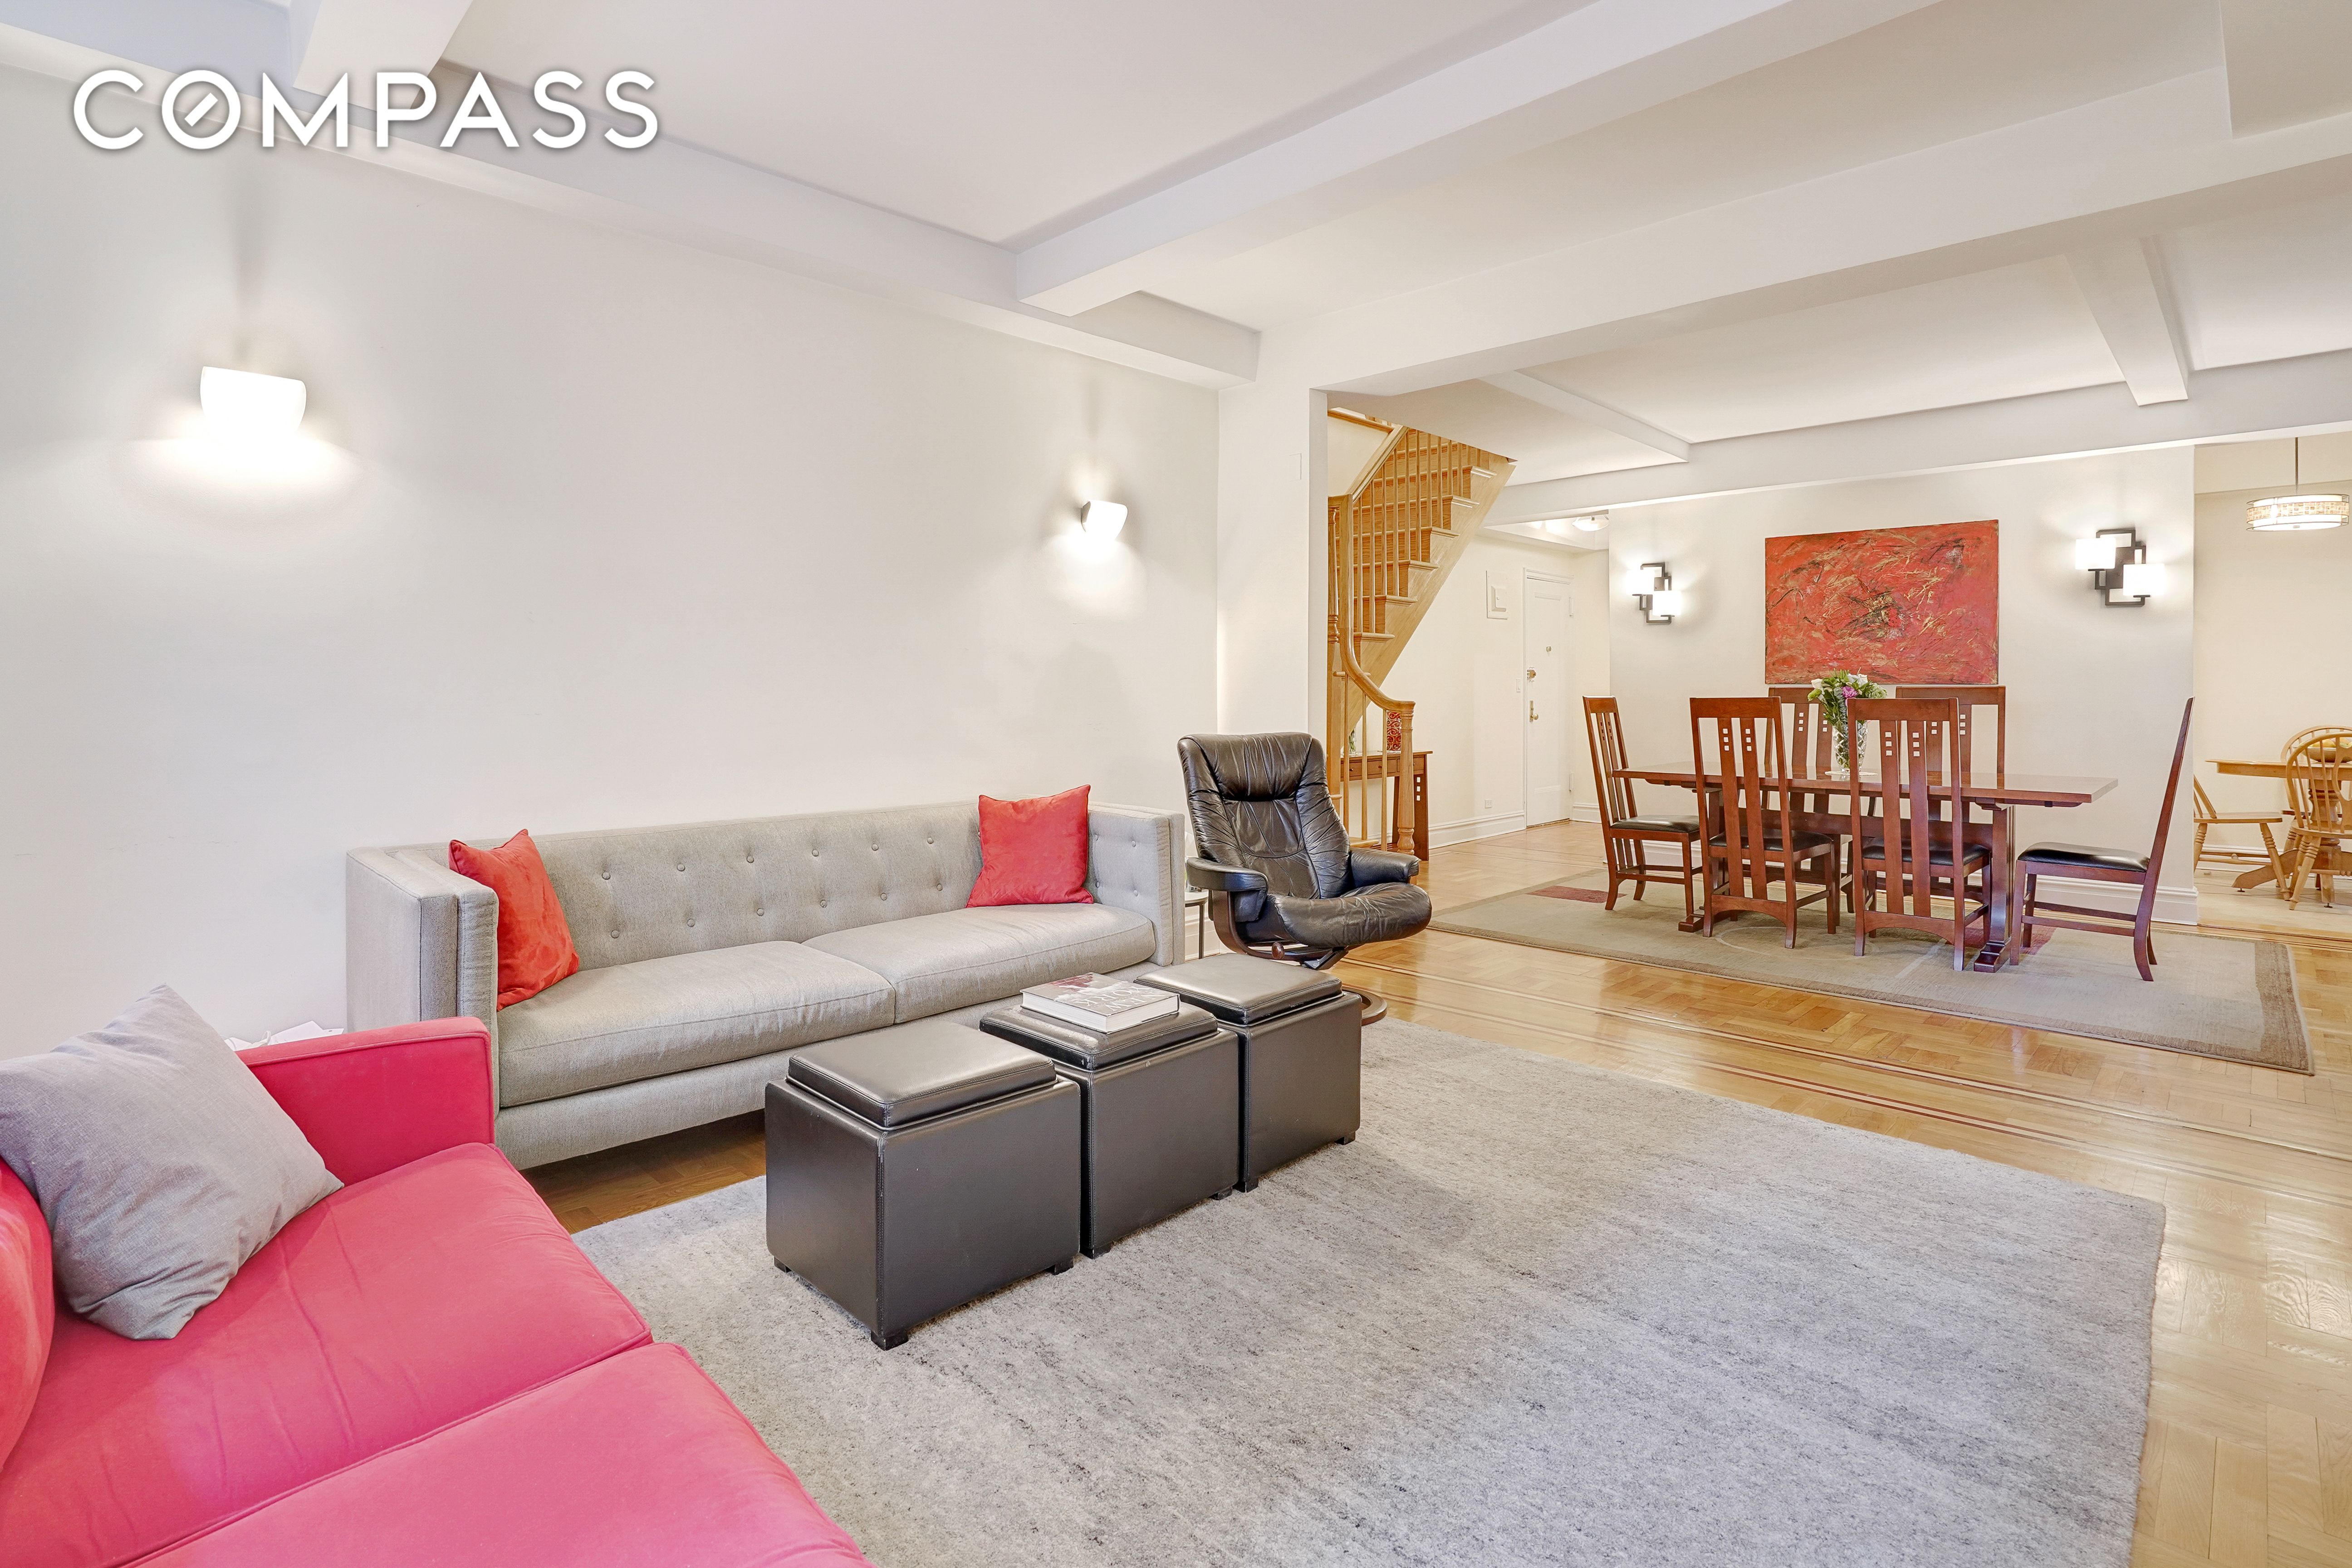 321 West 90th Street 2F, Upper West Side, Upper West Side, NYC - 4 Bedrooms  
2 Bathrooms  
7 Rooms - 